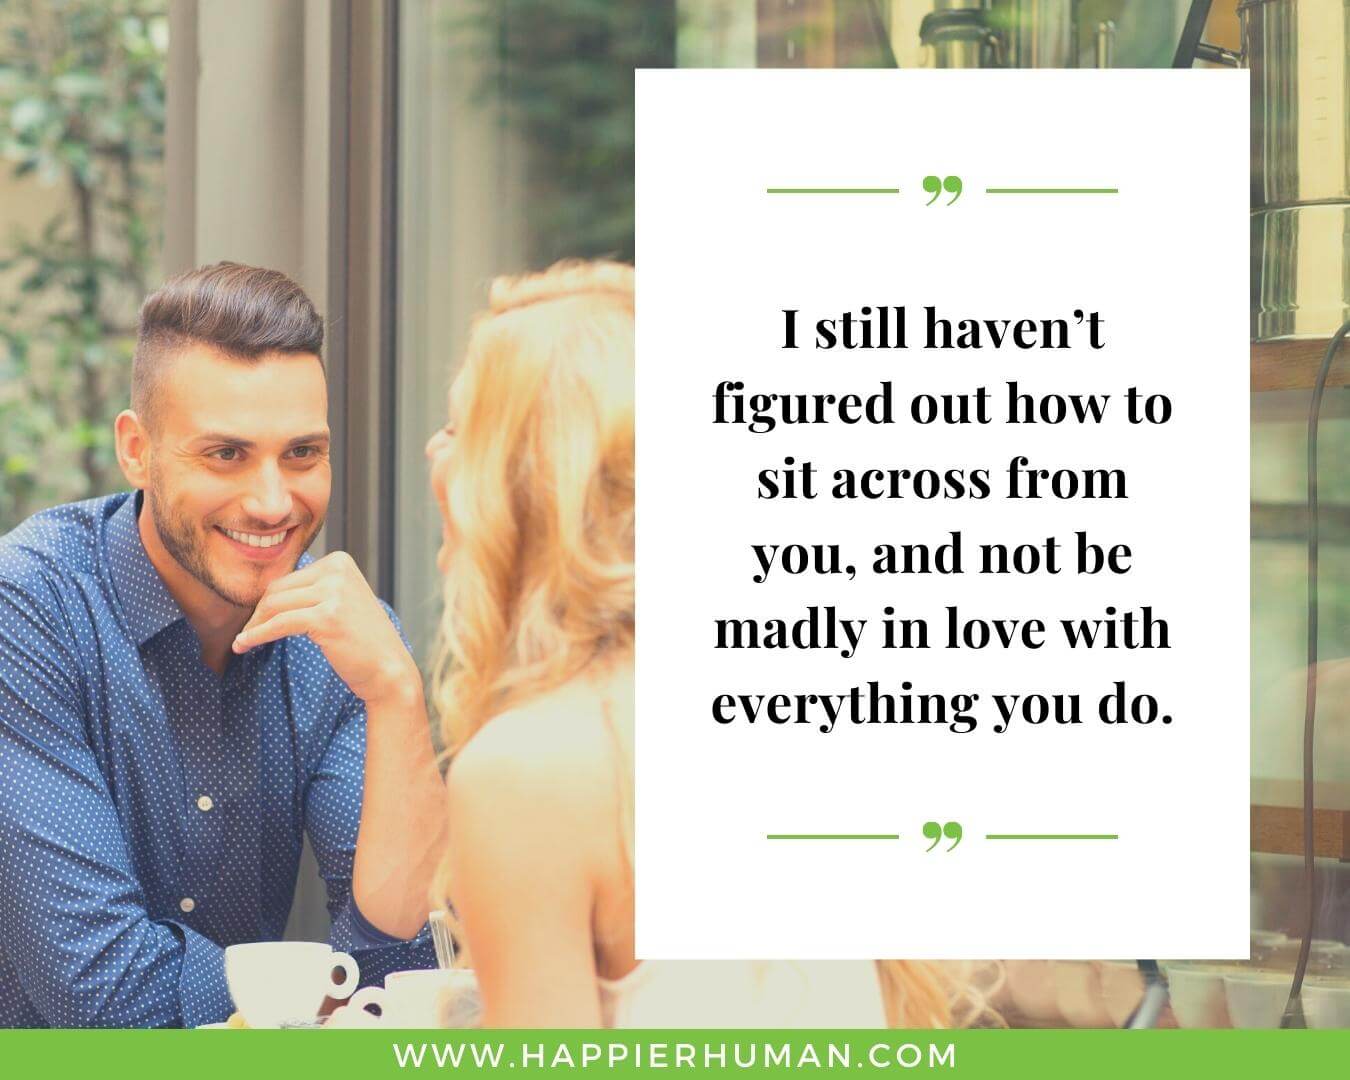 Unconditional Love Quotes for Her - “I still haven’t figured out how to sit across from you, and not be madly in love with everything you do.”